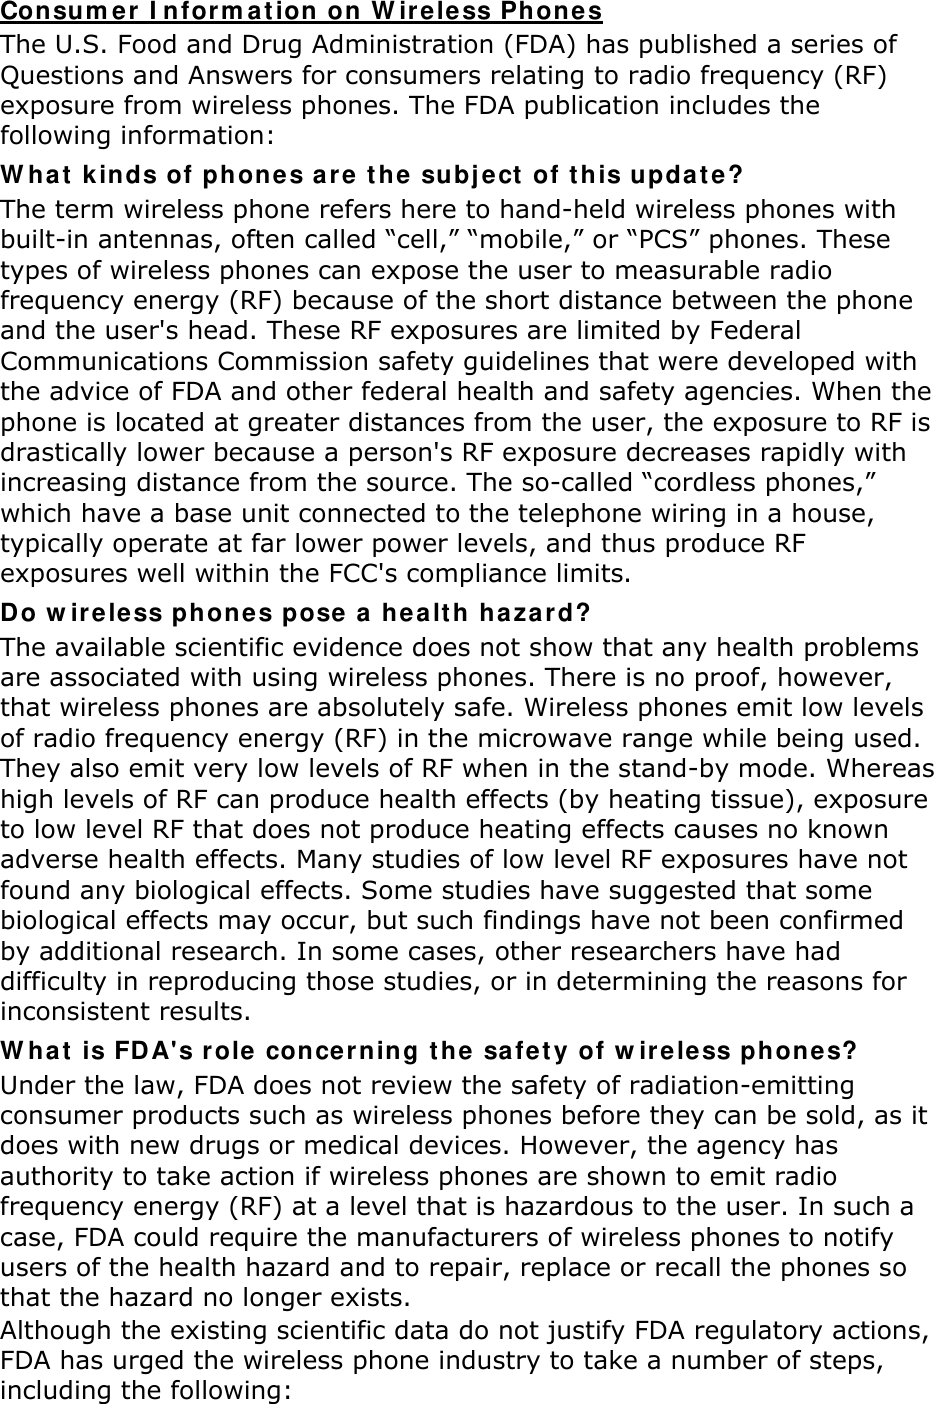 Consum er I nfor m a tion on W irele ss Phones The U.S. Food and Drug Administration (FDA) has published a series of Questions and Answers for consumers relating to radio frequency (RF) exposure from wireless phones. The FDA publication includes the following information: W hat kinds of phones a re the subj e ct  of this upda te? The term wireless phone refers here to hand-held wireless phones with built-in antennas, often called “cell,” “mobile,” or “PCS” phones. These types of wireless phones can expose the user to measurable radio frequency energy (RF) because of the short distance between the phone and the user&apos;s head. These RF exposures are limited by Federal Communications Commission safety guidelines that were developed with the advice of FDA and other federal health and safety agencies. When the phone is located at greater distances from the user, the exposure to RF is drastically lower because a person&apos;s RF exposure decreases rapidly with increasing distance from the source. The so-called “cordless phones,” which have a base unit connected to the telephone wiring in a house, typically operate at far lower power levels, and thus produce RF exposures well within the FCC&apos;s compliance limits. Do w ir eless phones pose a h ea lt h haza rd? The available scientific evidence does not show that any health problems are associated with using wireless phones. There is no proof, however, that wireless phones are absolutely safe. Wireless phones emit low levels of radio frequency energy (RF) in the microwave range while being used. They also emit very low levels of RF when in the stand-by mode. Whereas high levels of RF can produce health effects (by heating tissue), exposure to low level RF that does not produce heating effects causes no known adverse health effects. Many studies of low level RF exposures have not found any biological effects. Some studies have suggested that some biological effects may occur, but such findings have not been confirmed by additional research. In some cases, other researchers have had difficulty in reproducing those studies, or in determining the reasons for inconsistent results. W hat is FDA&apos;s role  conce rning the sa fet y of w ir eless phones? Under the law, FDA does not review the safety of radiation-emitting consumer products such as wireless phones before they can be sold, as it does with new drugs or medical devices. However, the agency has authority to take action if wireless phones are shown to emit radio frequency energy (RF) at a level that is hazardous to the user. In such a case, FDA could require the manufacturers of wireless phones to notify users of the health hazard and to repair, replace or recall the phones so that the hazard no longer exists. Although the existing scientific data do not justify FDA regulatory actions, FDA has urged the wireless phone industry to take a number of steps, including the following: 